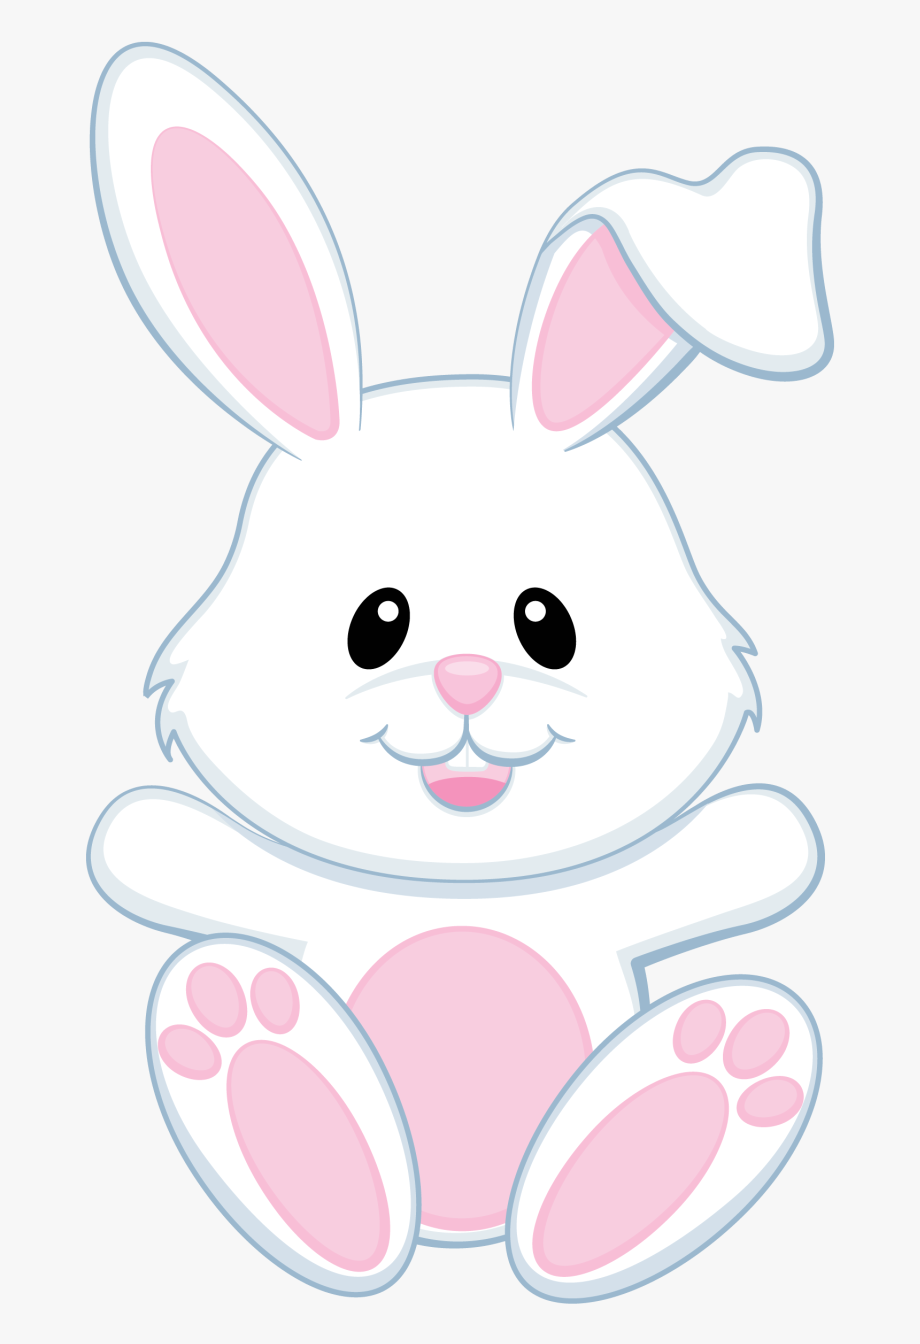 Bunny clipart, Picture #2241222 bunny clipart